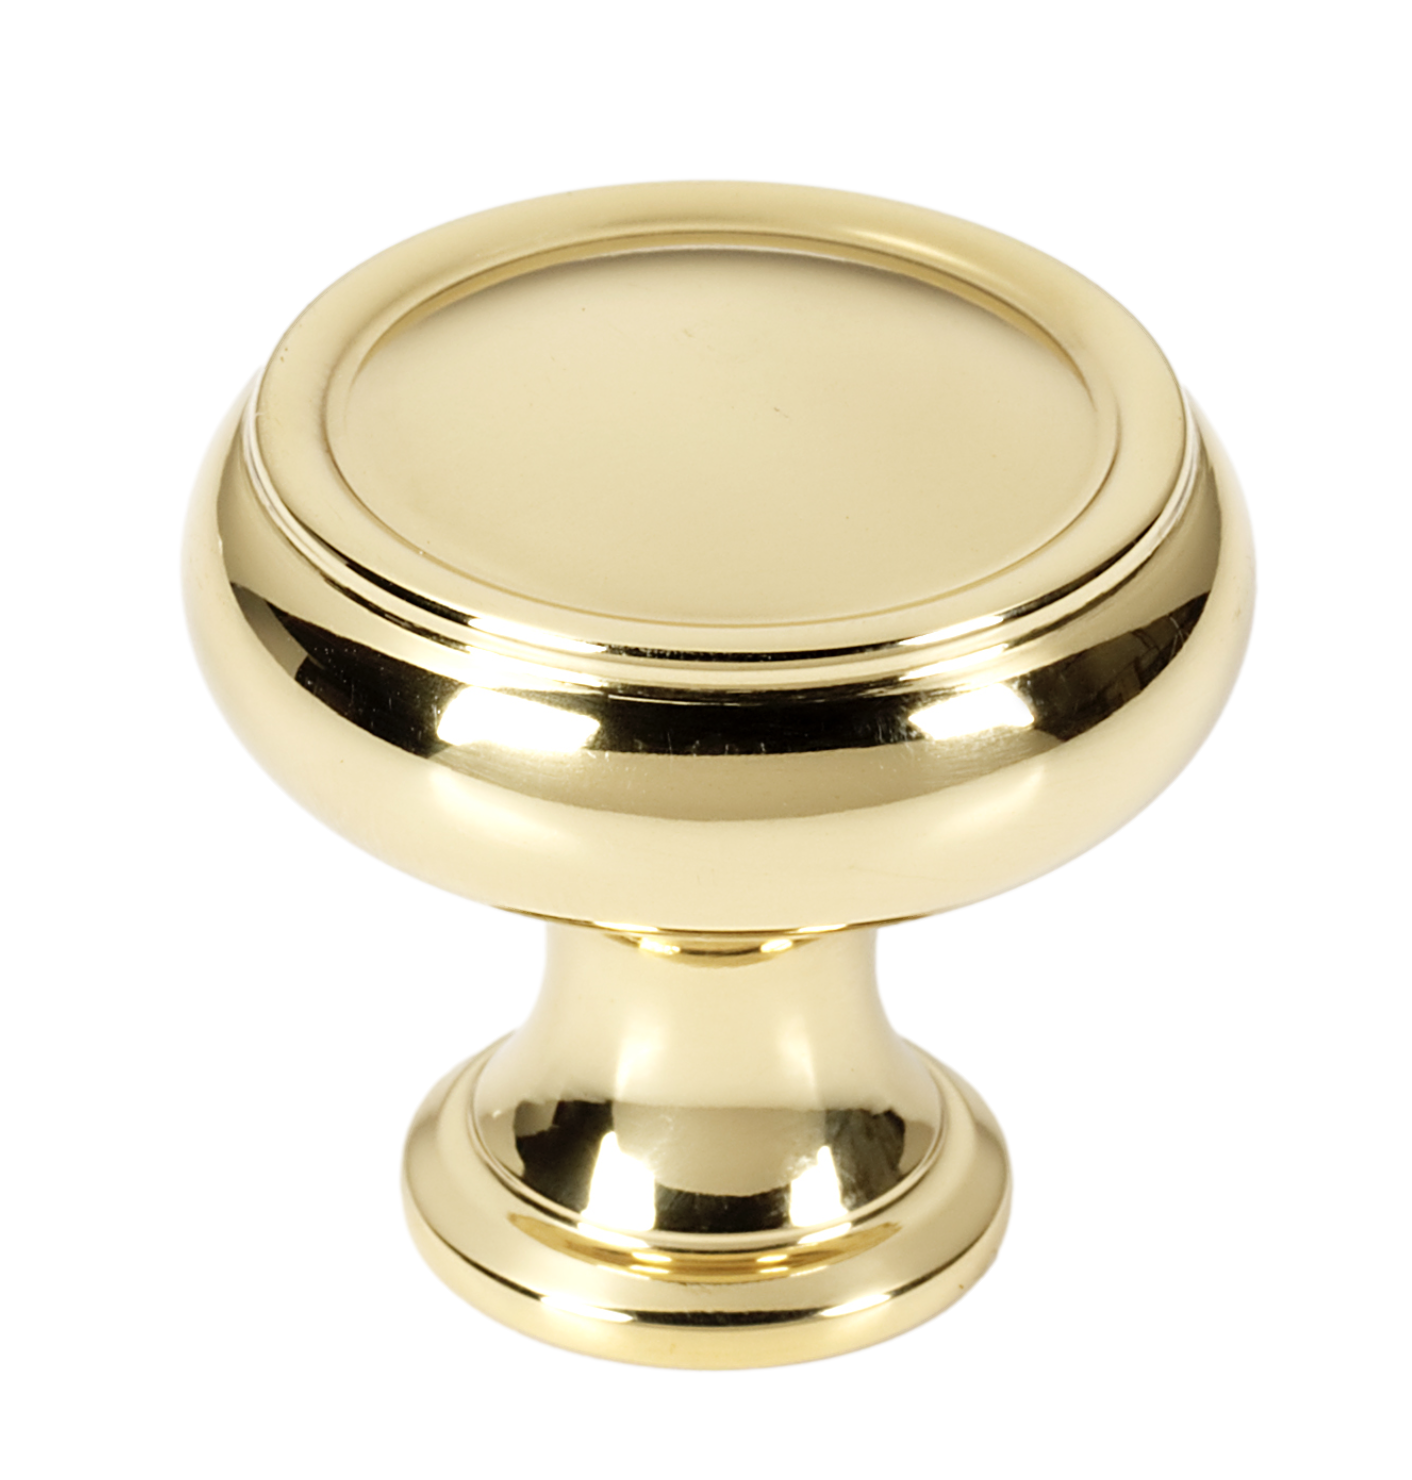 Unlacquered Brass "Perry" Cabinet Knobs and Drawer Pulls